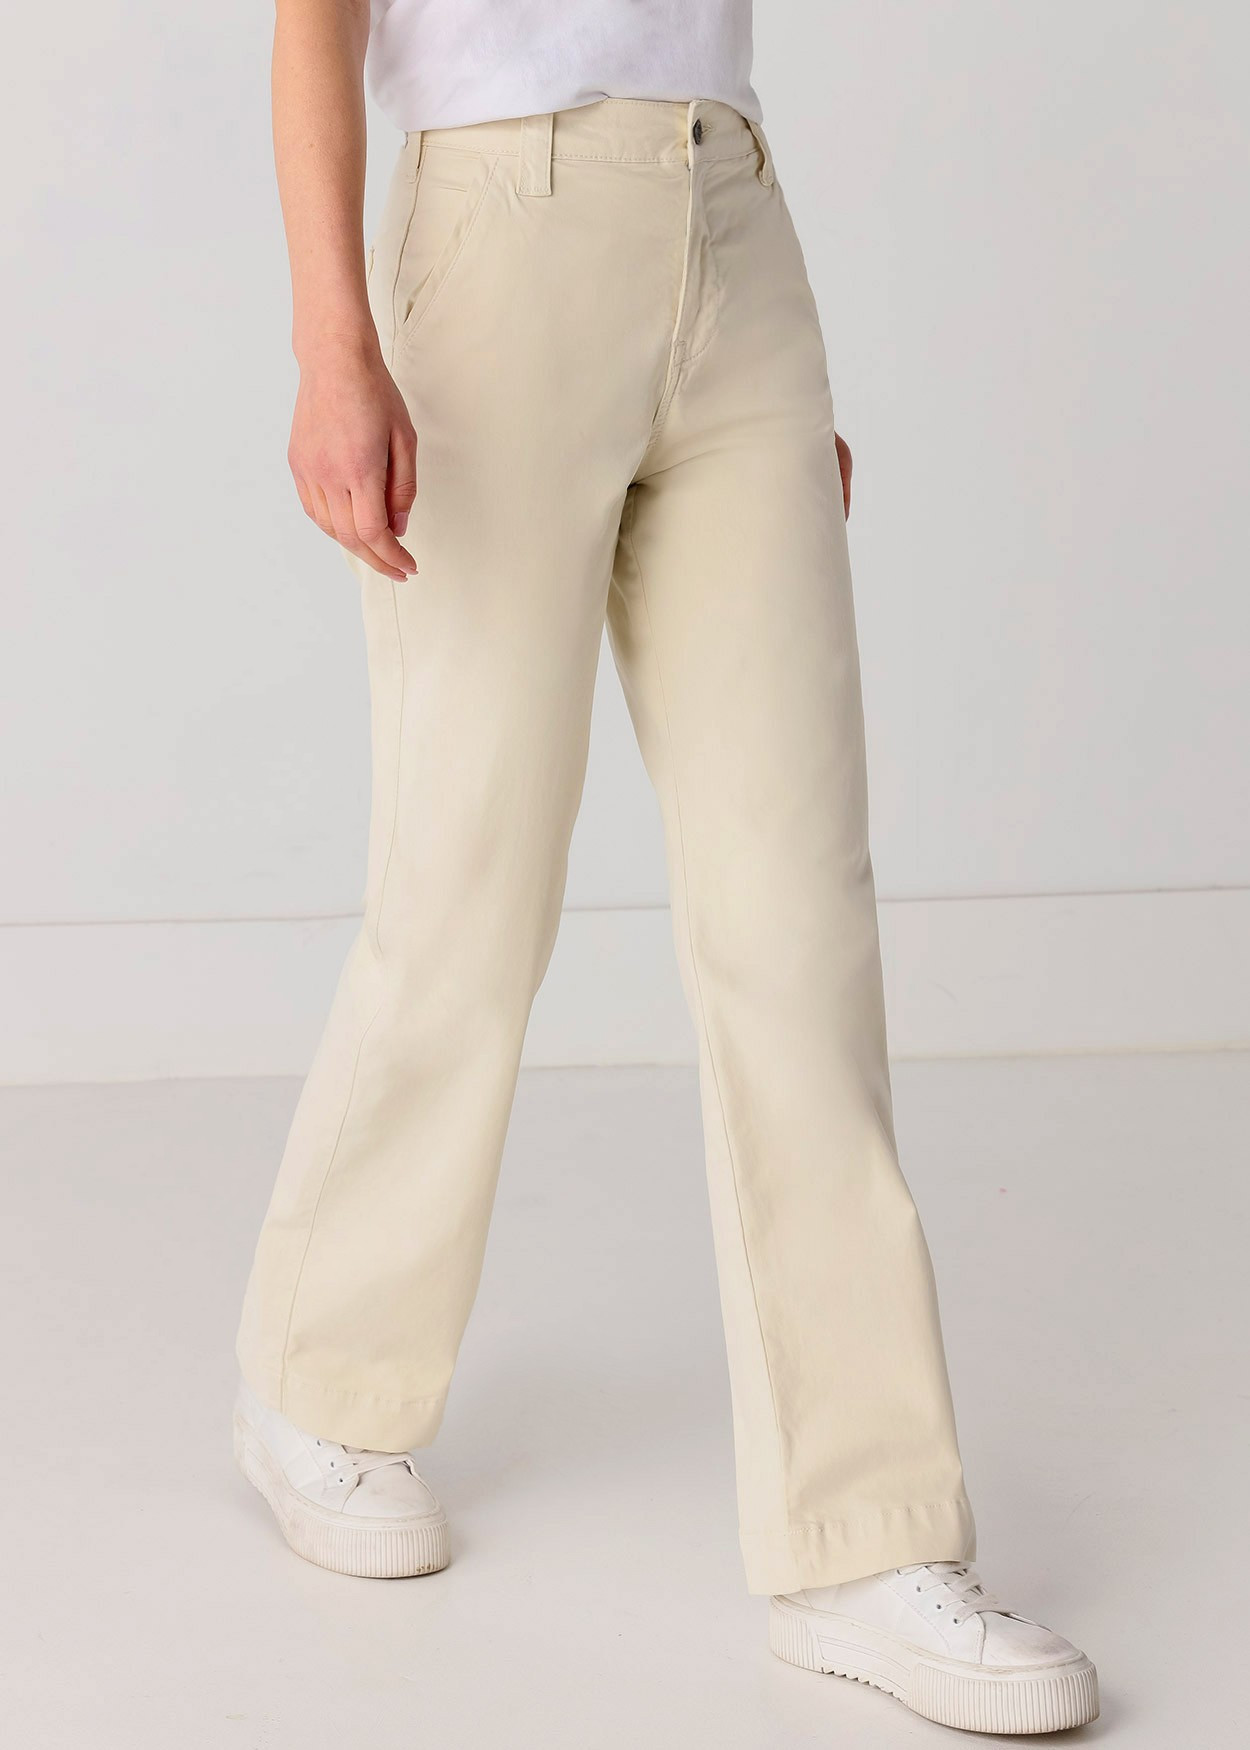 Chino Olivia Nectar | Taille haute - Coupe large droite | Taille en pouces